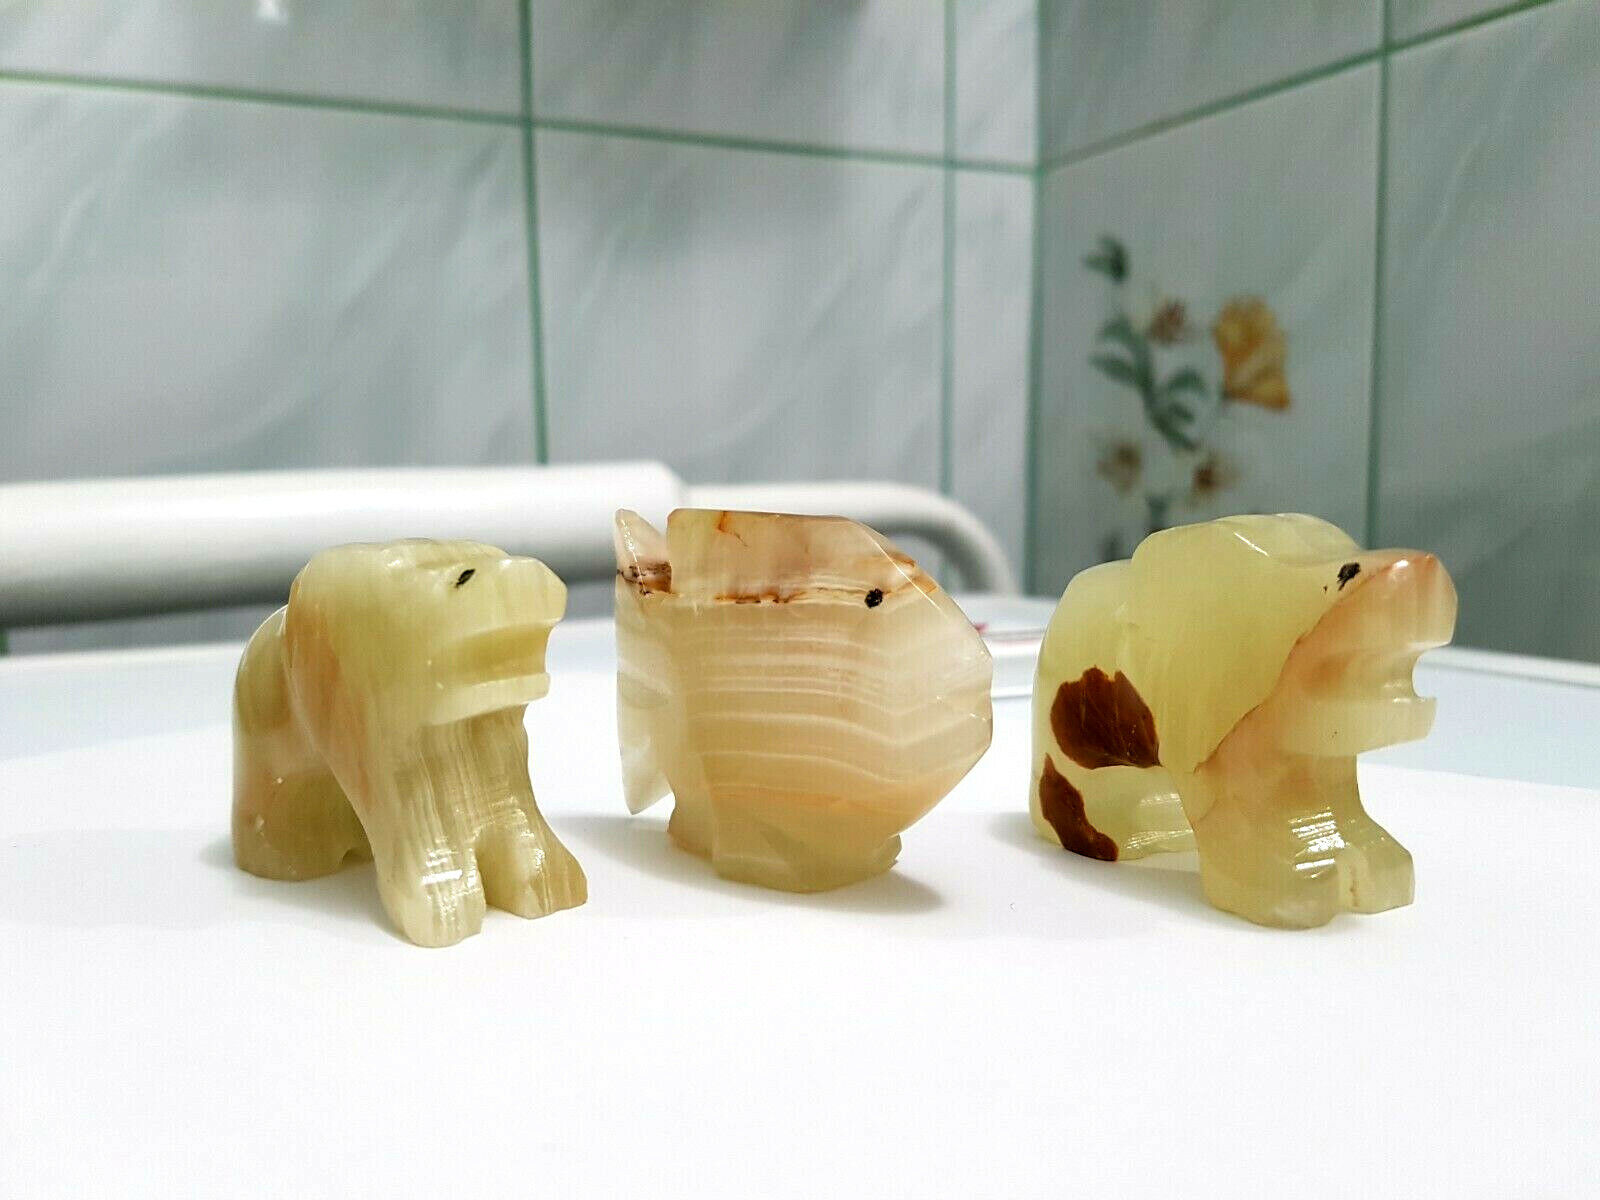 Lot of Three Small Vintage Figures from Natural Onyx. Two Lions and a Fish.